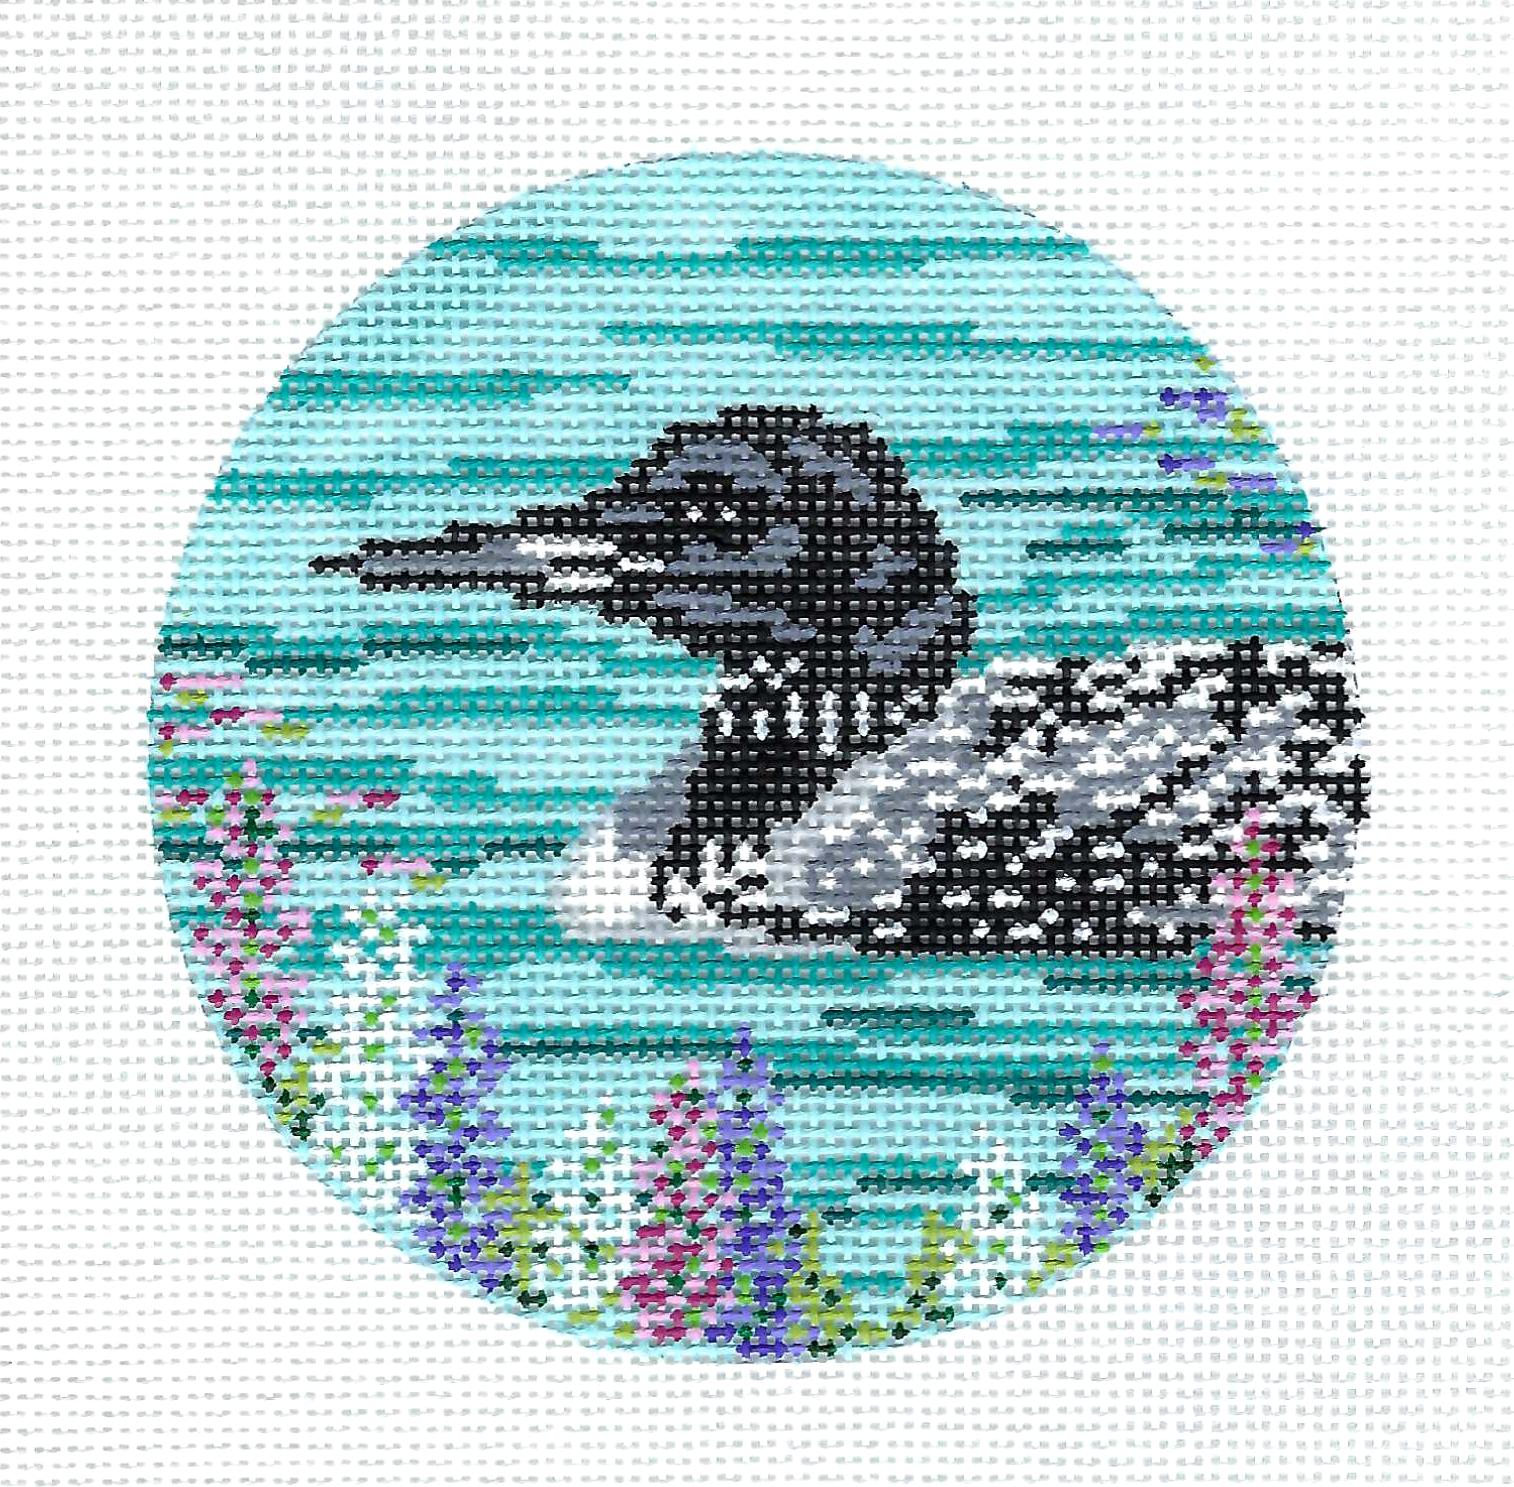 Loon on the Lake Bird handpainted 18 mesh Needlepoint Canvas by Needle  Crossings